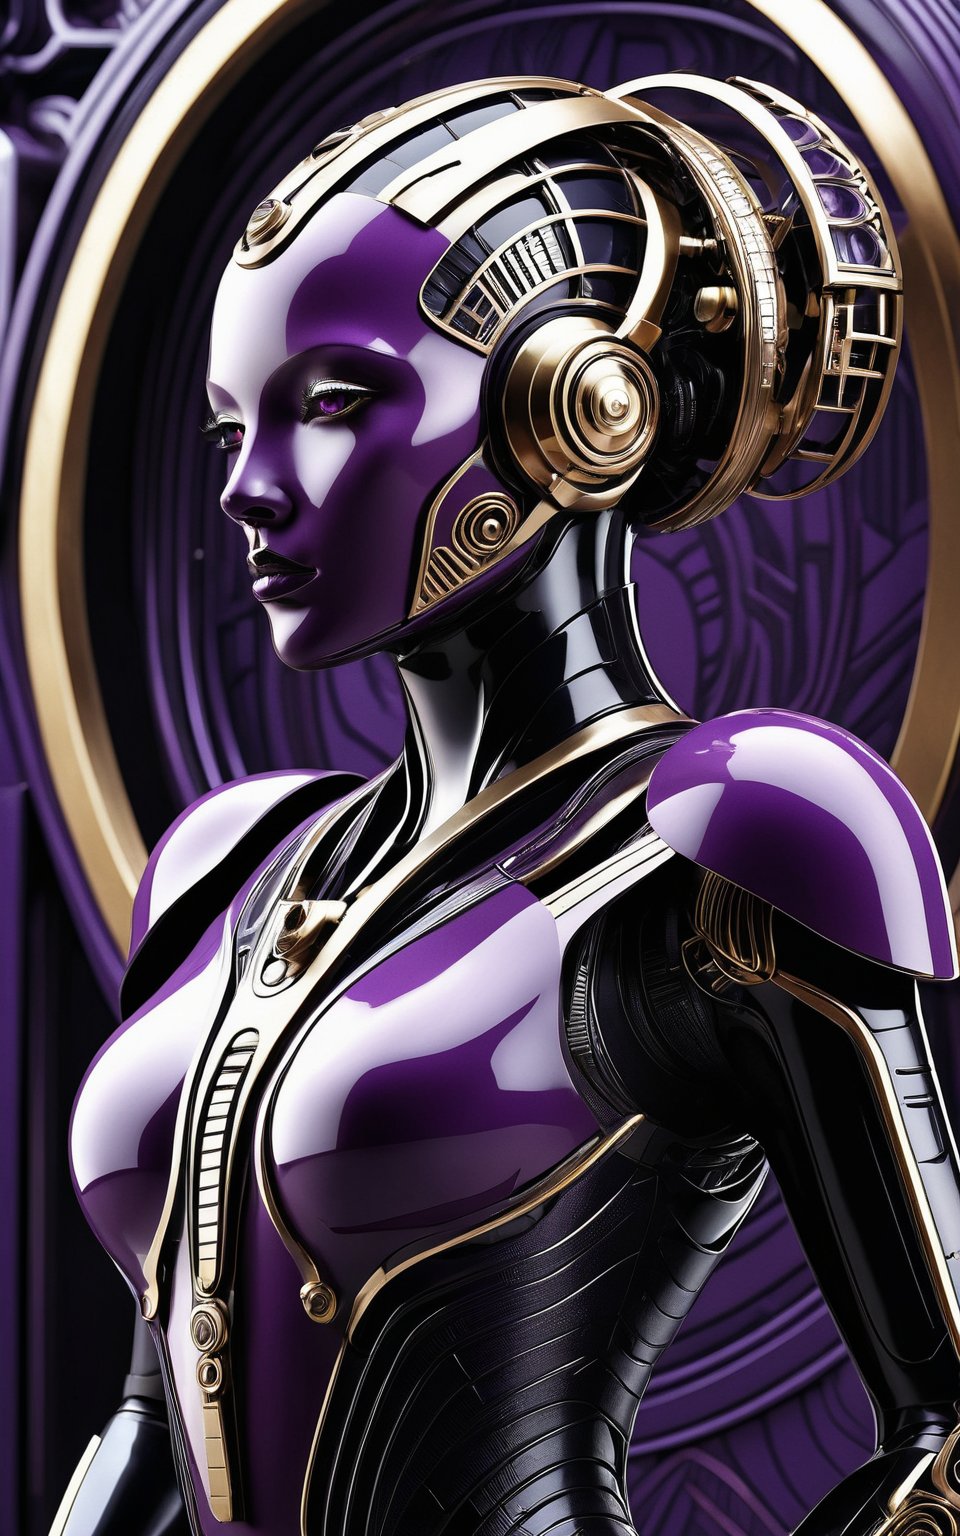 A hyper-realistic and hyper-detailed image of a biomechanical humanoid in a sci-fi setting. The design is in the style of modern Art Deco, featuring elegant luxury elements. The primary colors are purple and black, creating a striking contrast. The overall look is sophisticated and refined, embodying the elegance and opulence of Art Deco while incorporating futuristic biomechanical aspects. (hyper-realistic, hyper-detailed, sci-fi, modern Art Deco, elegant luxury, purple and black)